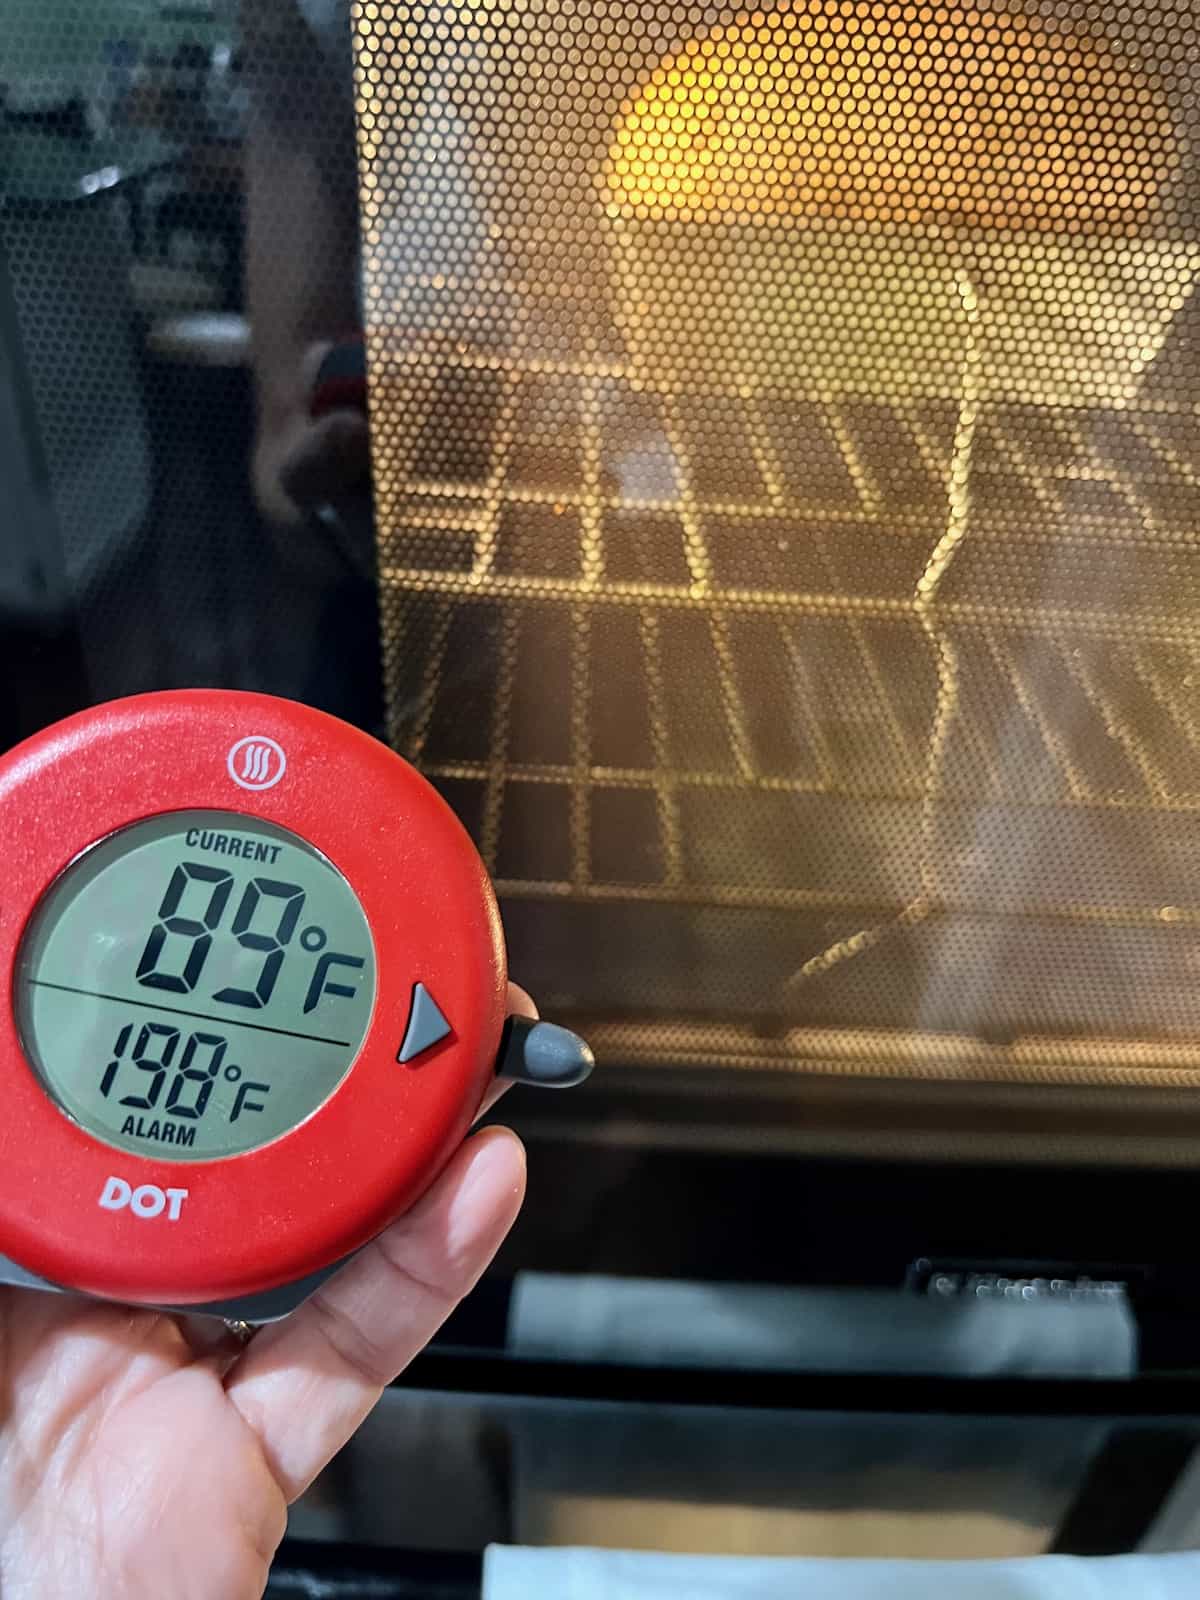 using a DOT digital thermometer to monitor the internal temp of a loaf of bread in the oven.